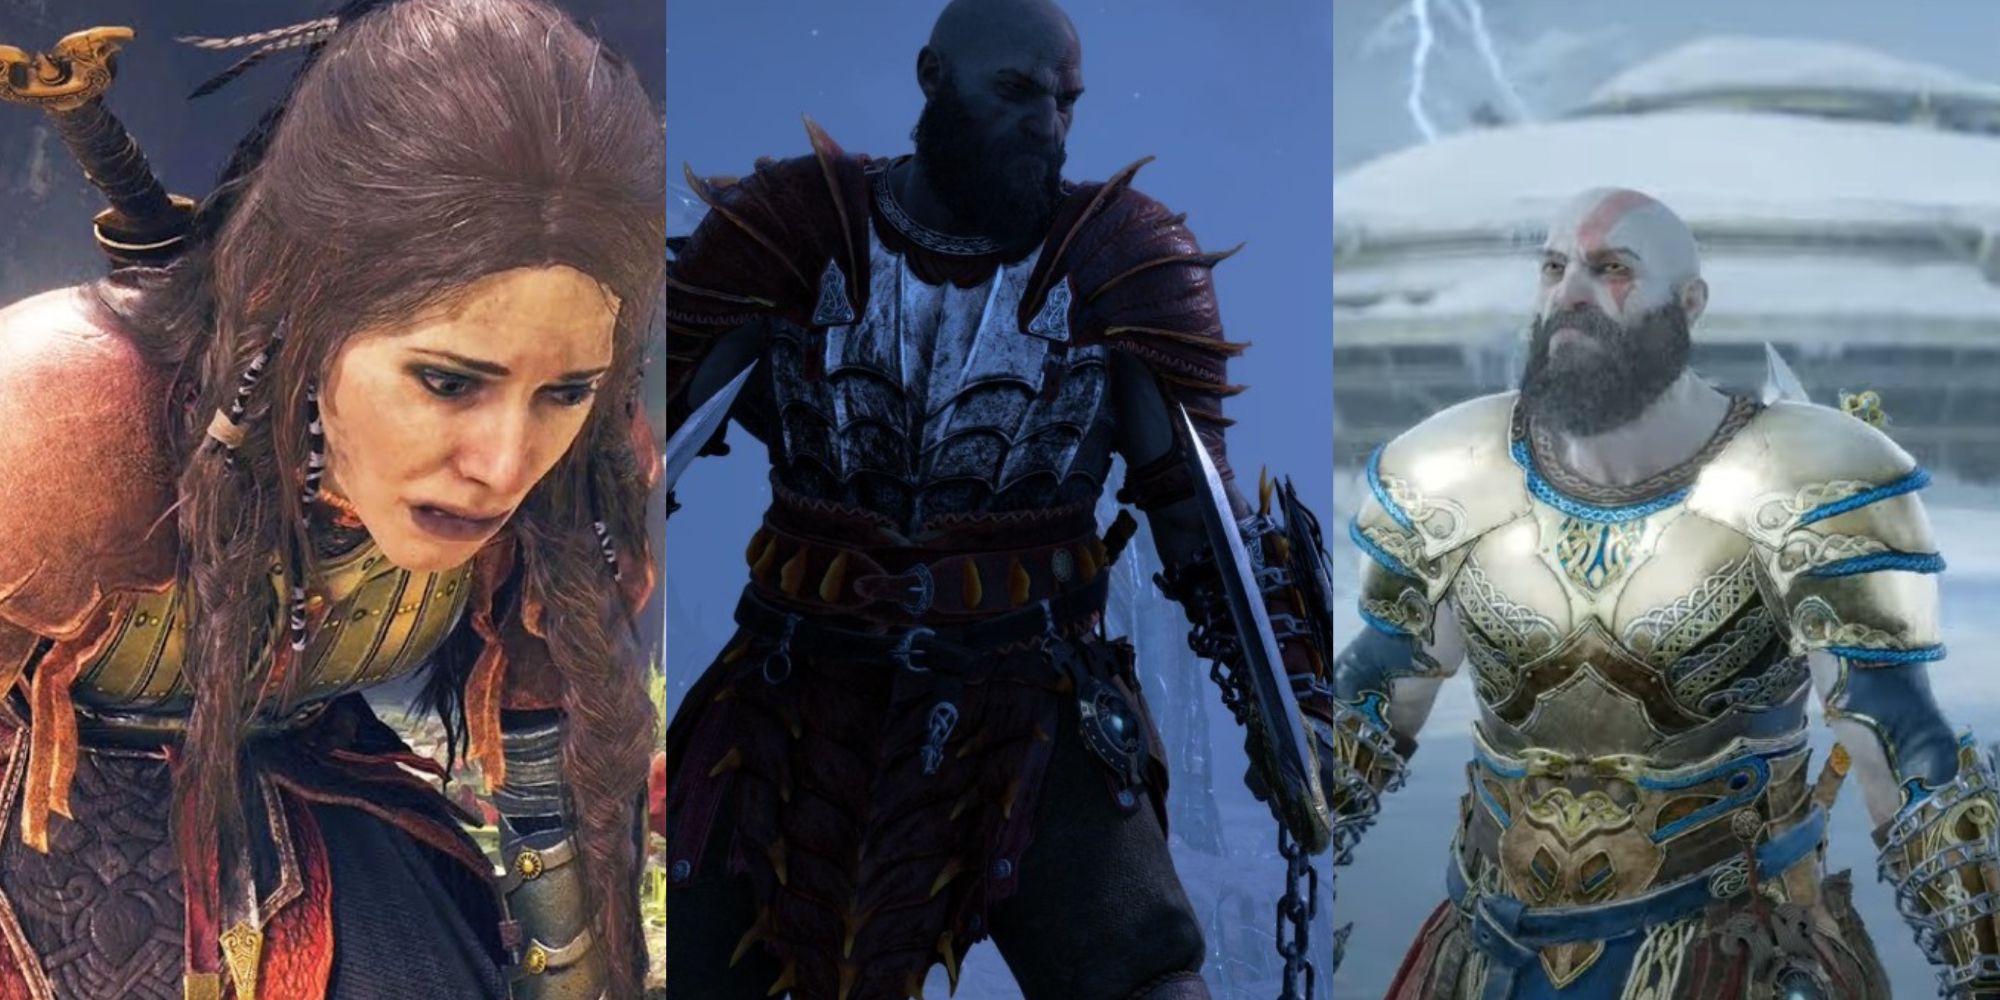 The 12 best armor sets in God of War Ragnarok, and where to find